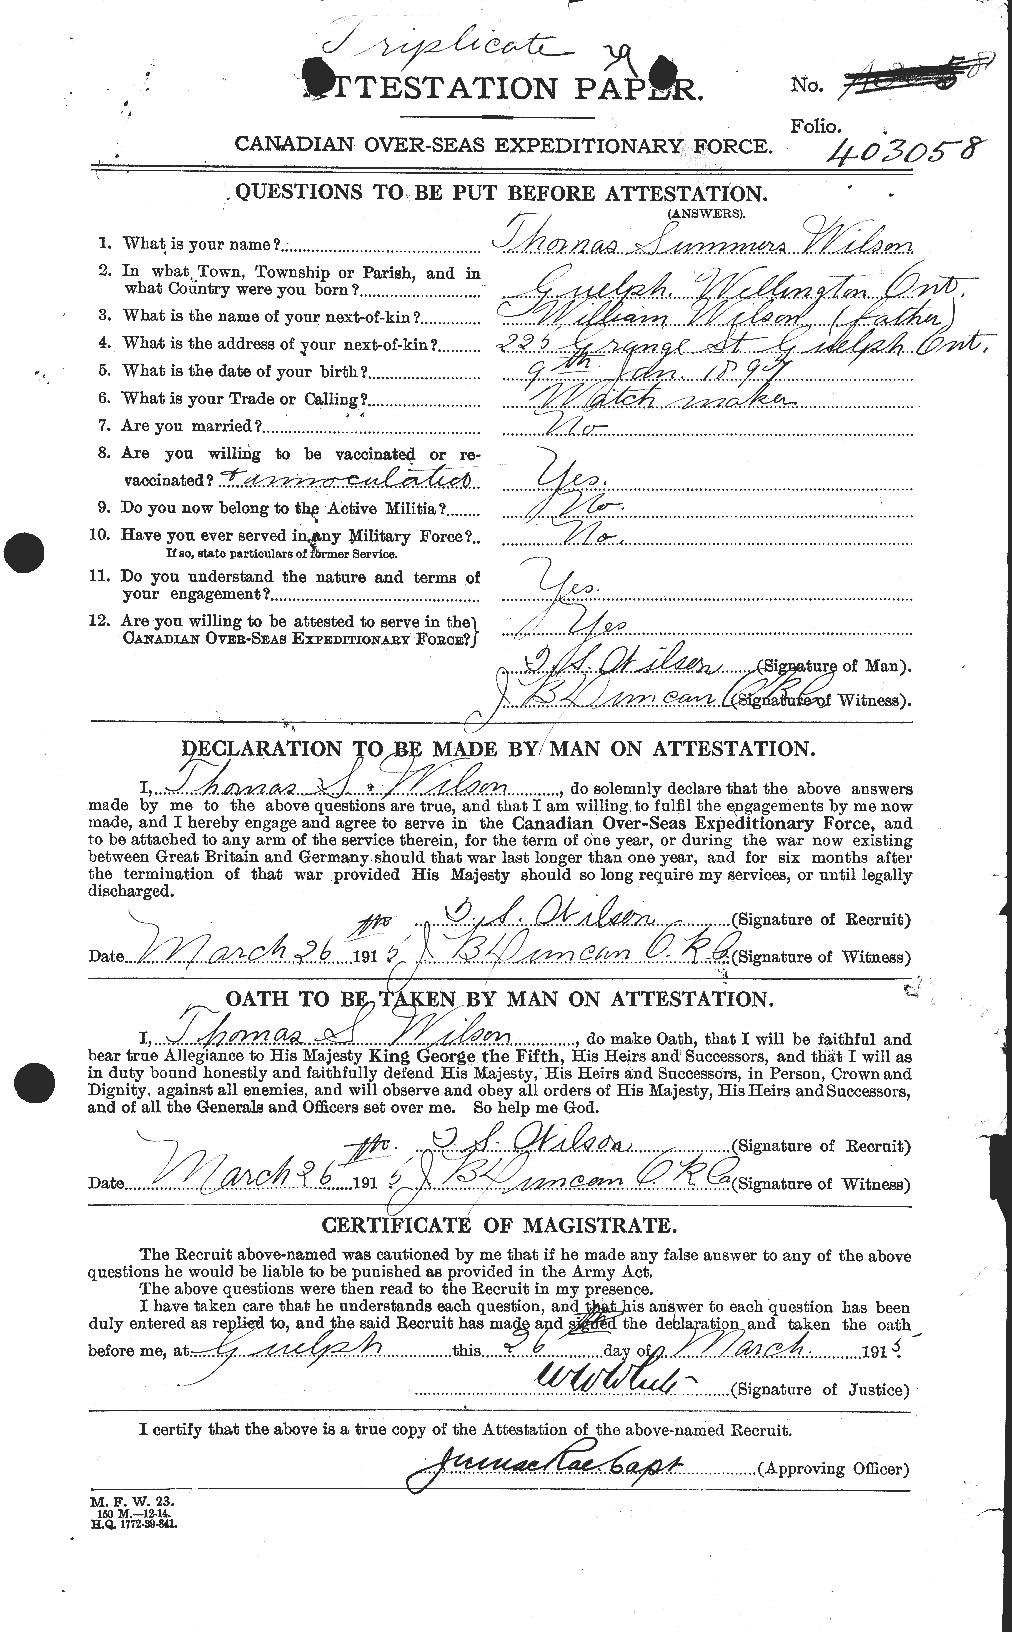 Personnel Records of the First World War - CEF 681687a